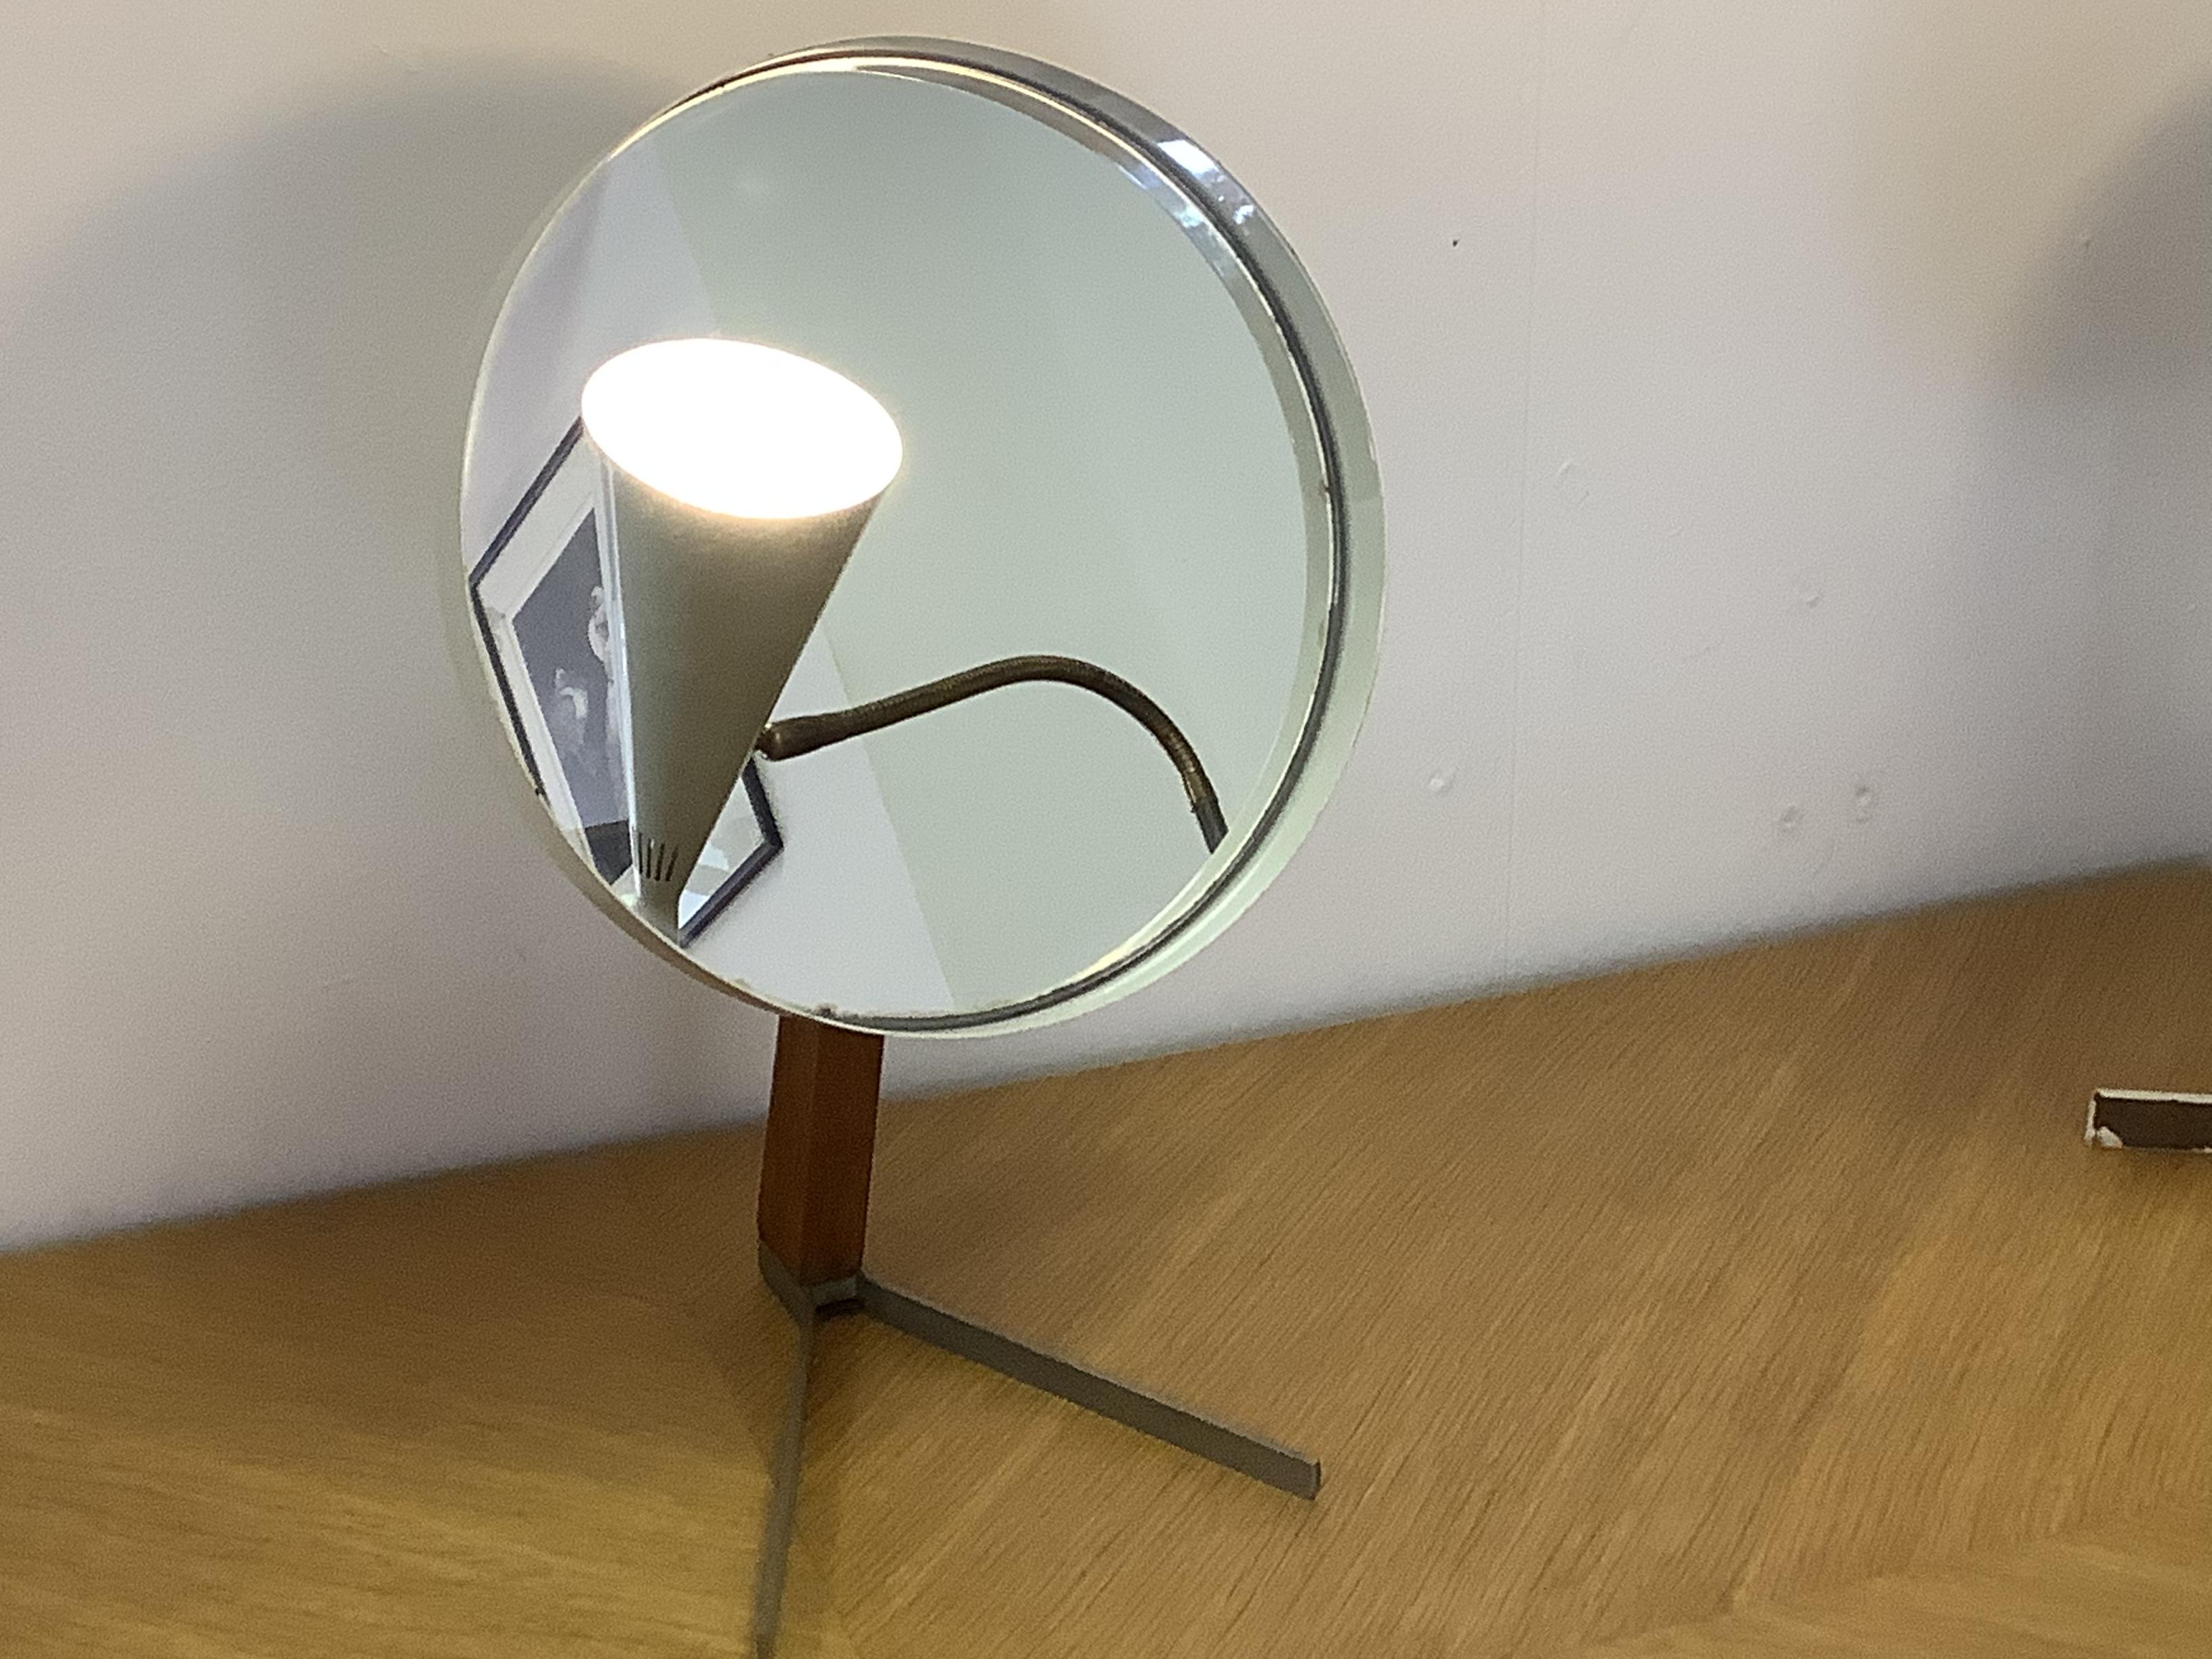 1960s classic Vanity mirror.
Teak wood with steel base with great patina.
White circular mirror frame with tilt action.
Attributed to both Robert Welch and Owen F Thomas.
Great practical and decorative piece.
Label intact on rear of